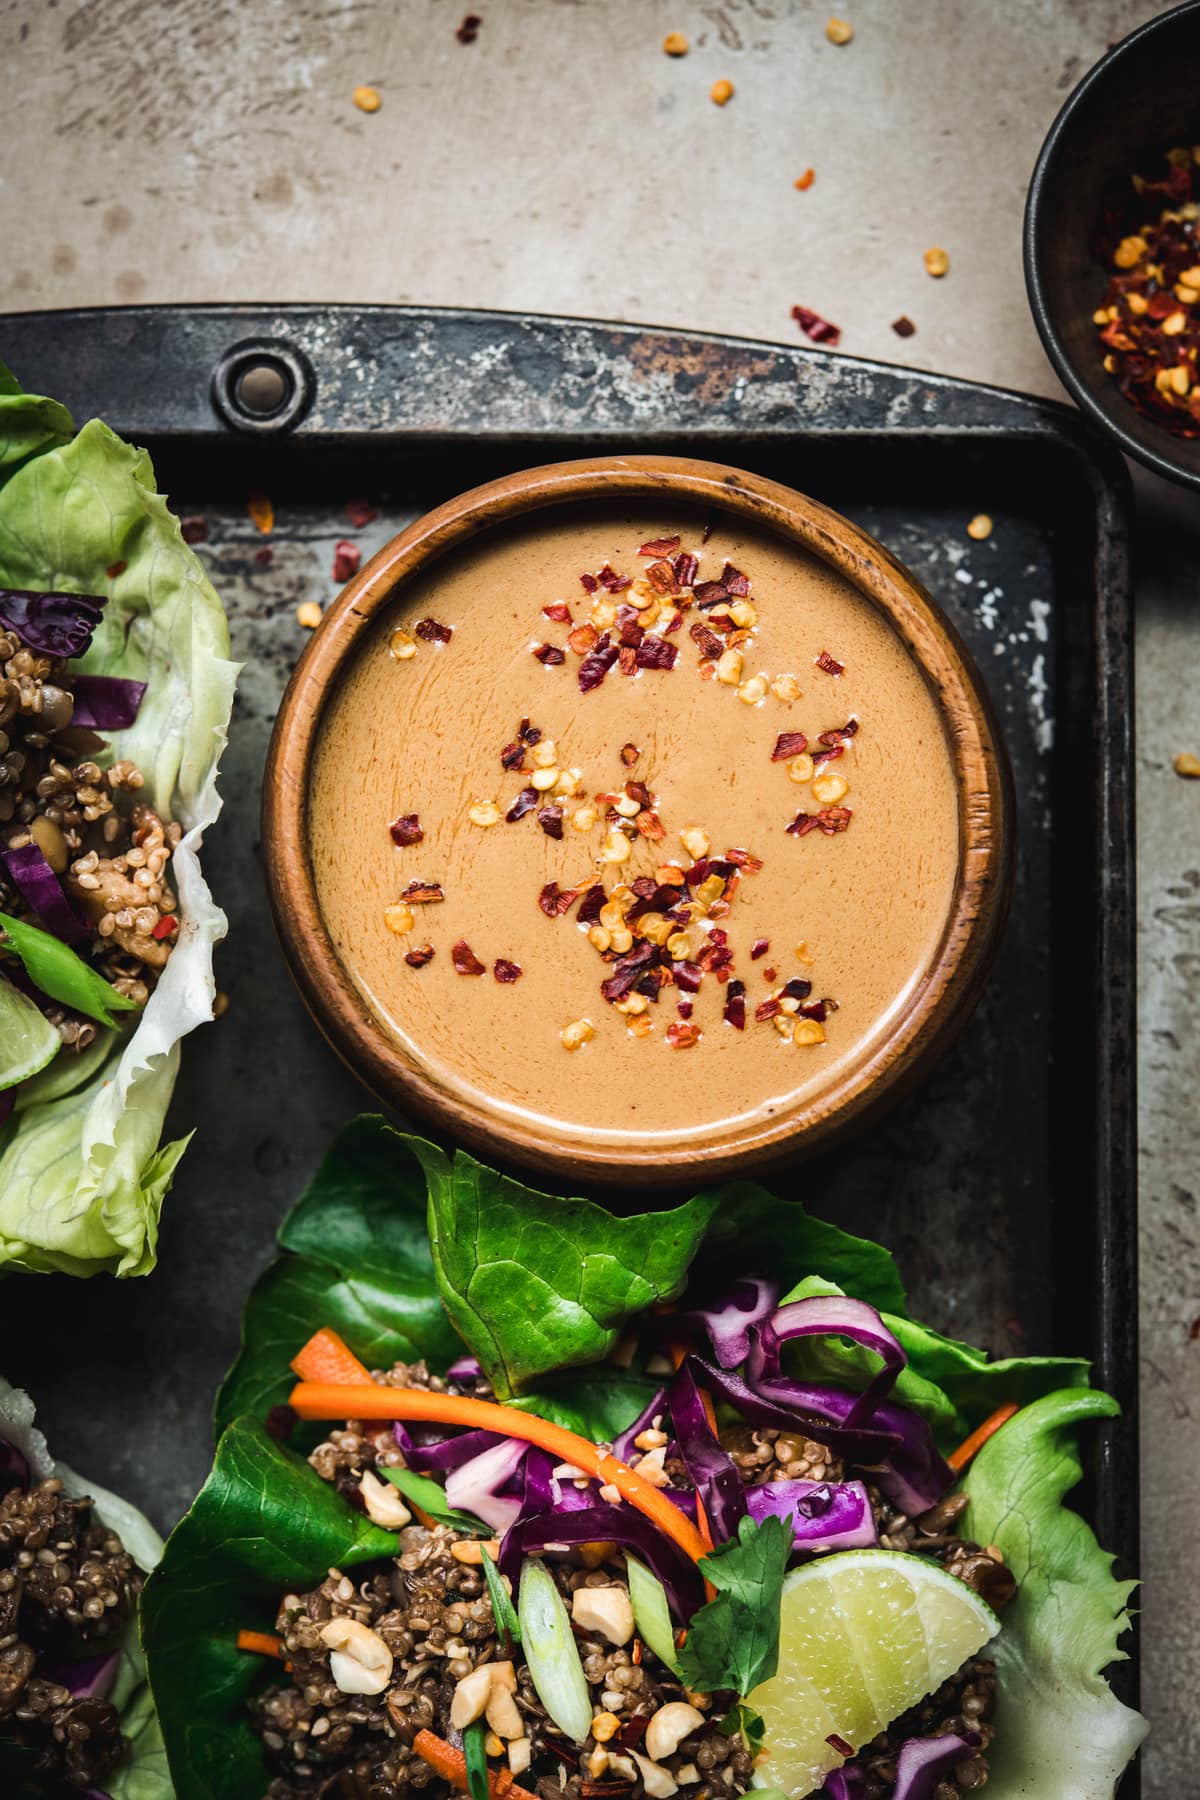 Overhead view of vegan spicy peanut sauce in wood bowl on antique tray to top vegan asian lettuce wraps